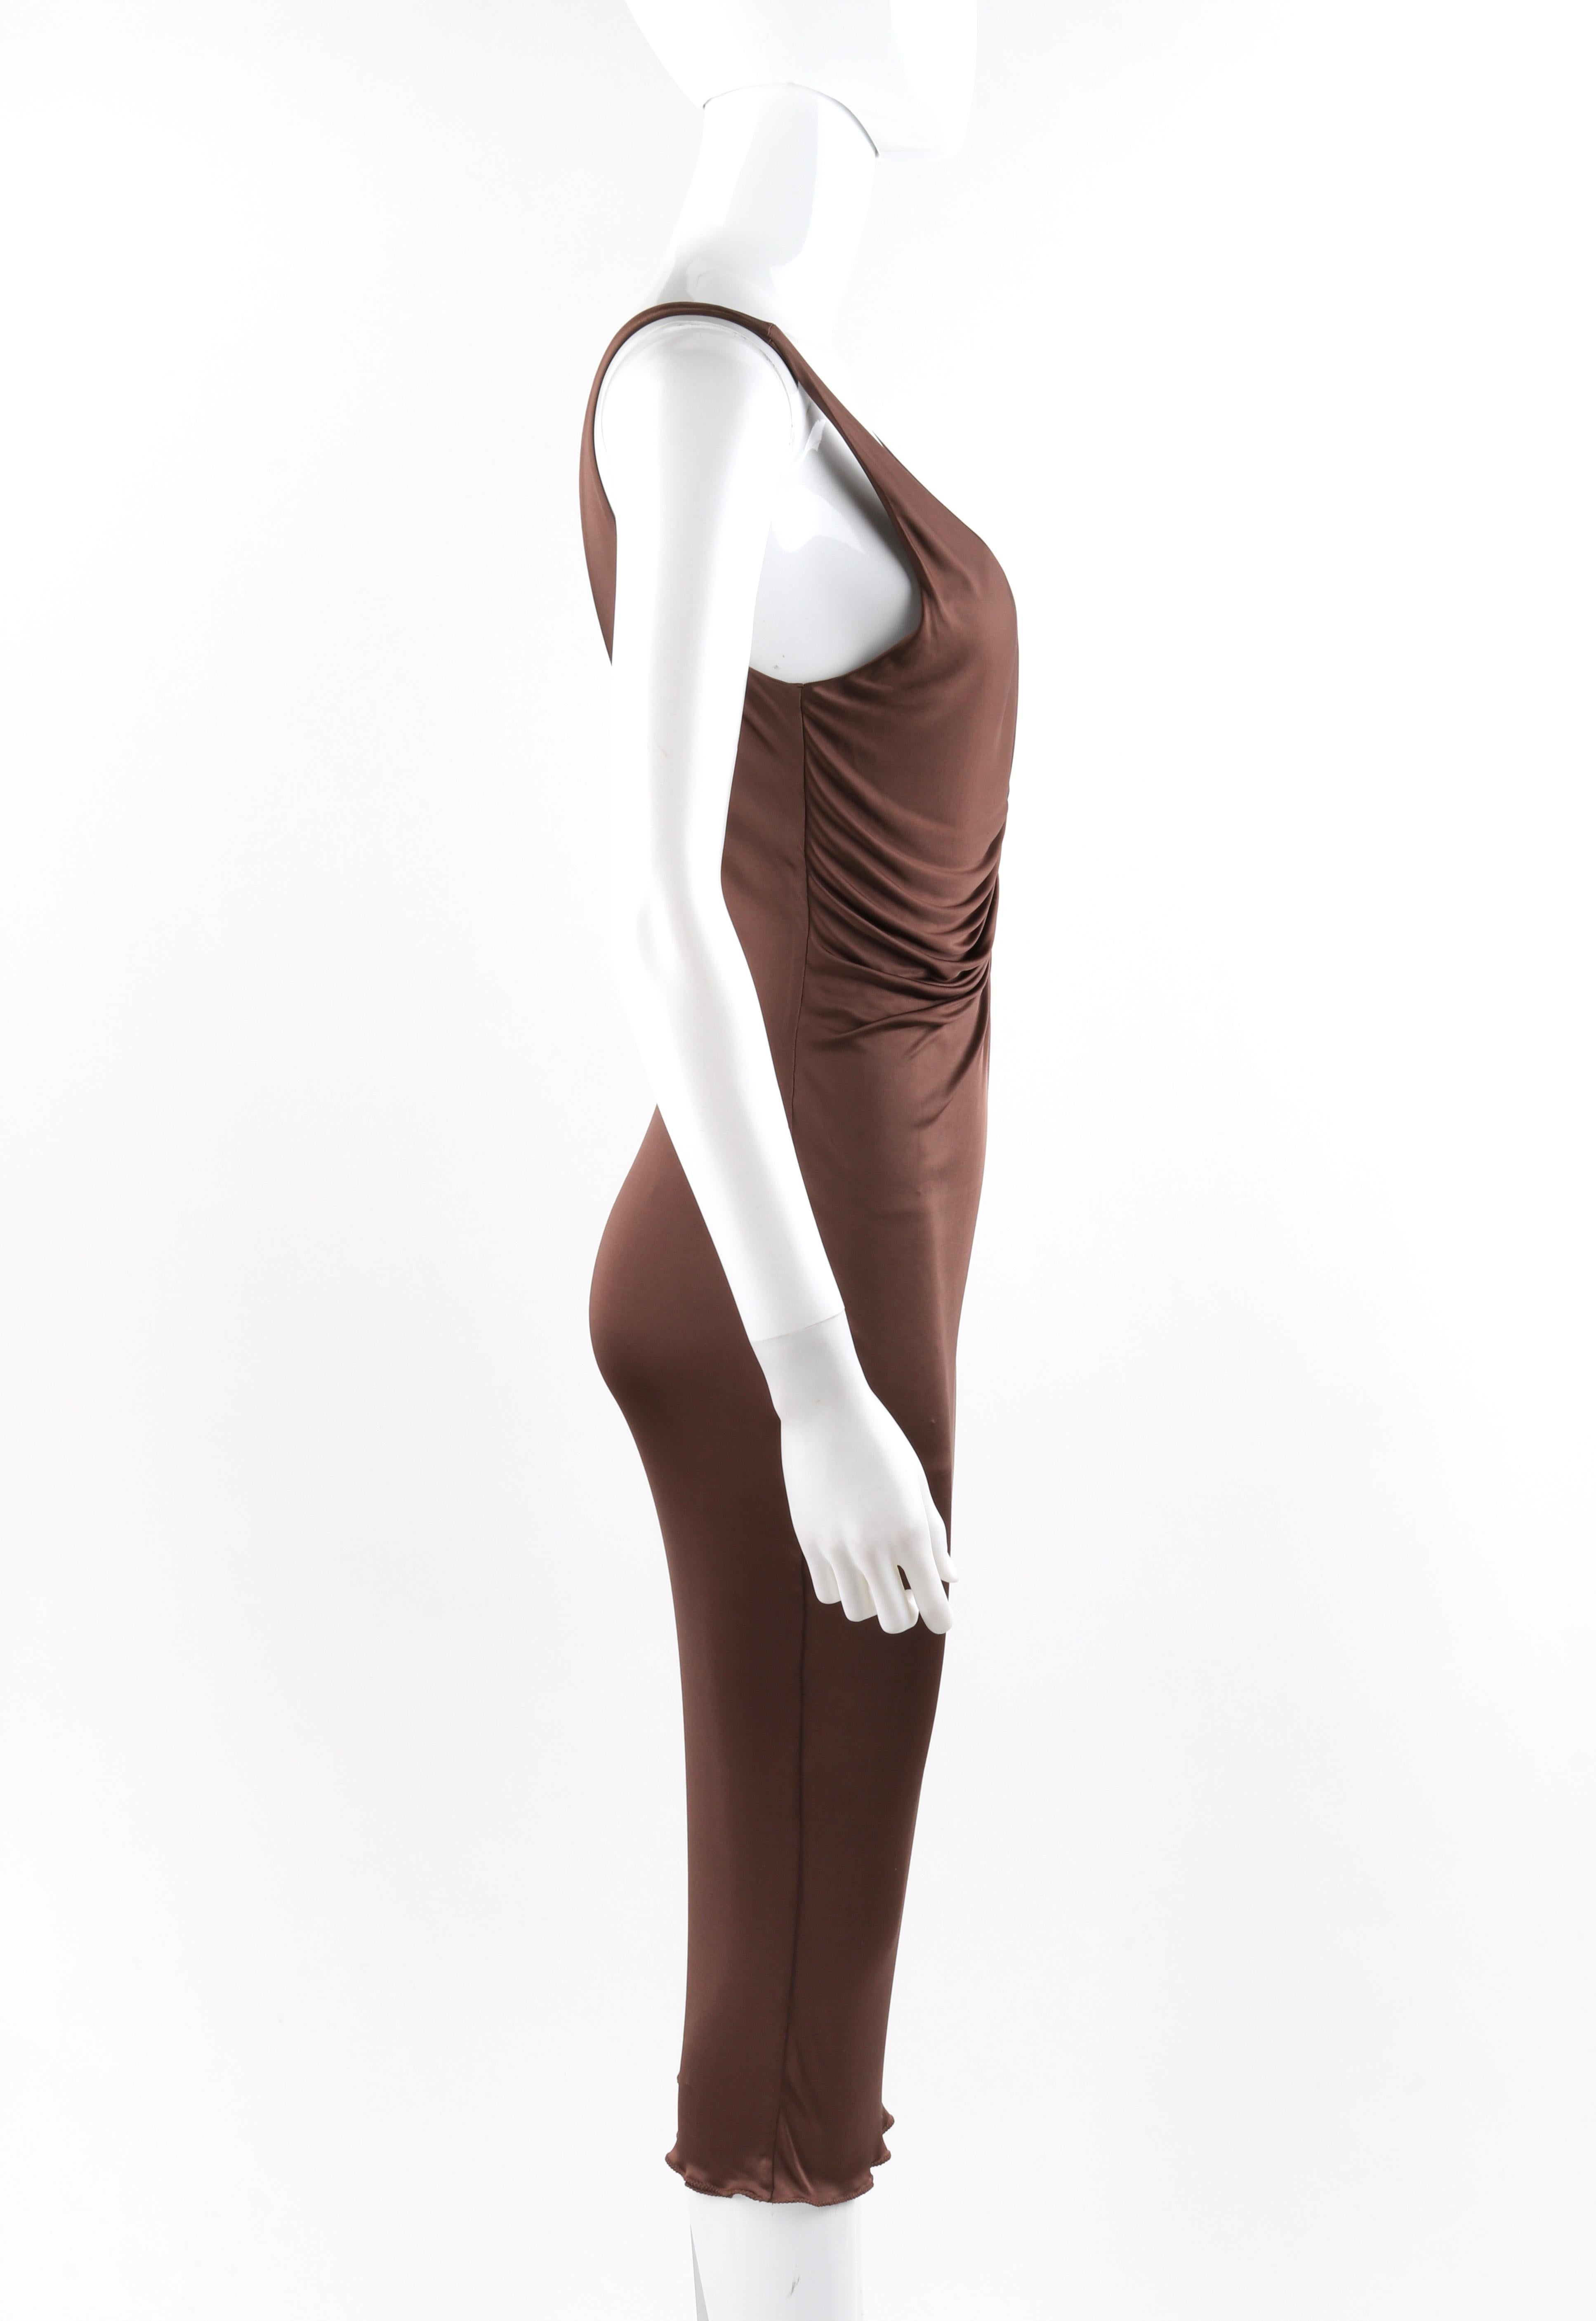 ALEXANDER McQUEEN S/S 1996 Brown Plunging Keyhole Neck Bodycon Midi Dress In Good Condition For Sale In Thiensville, WI